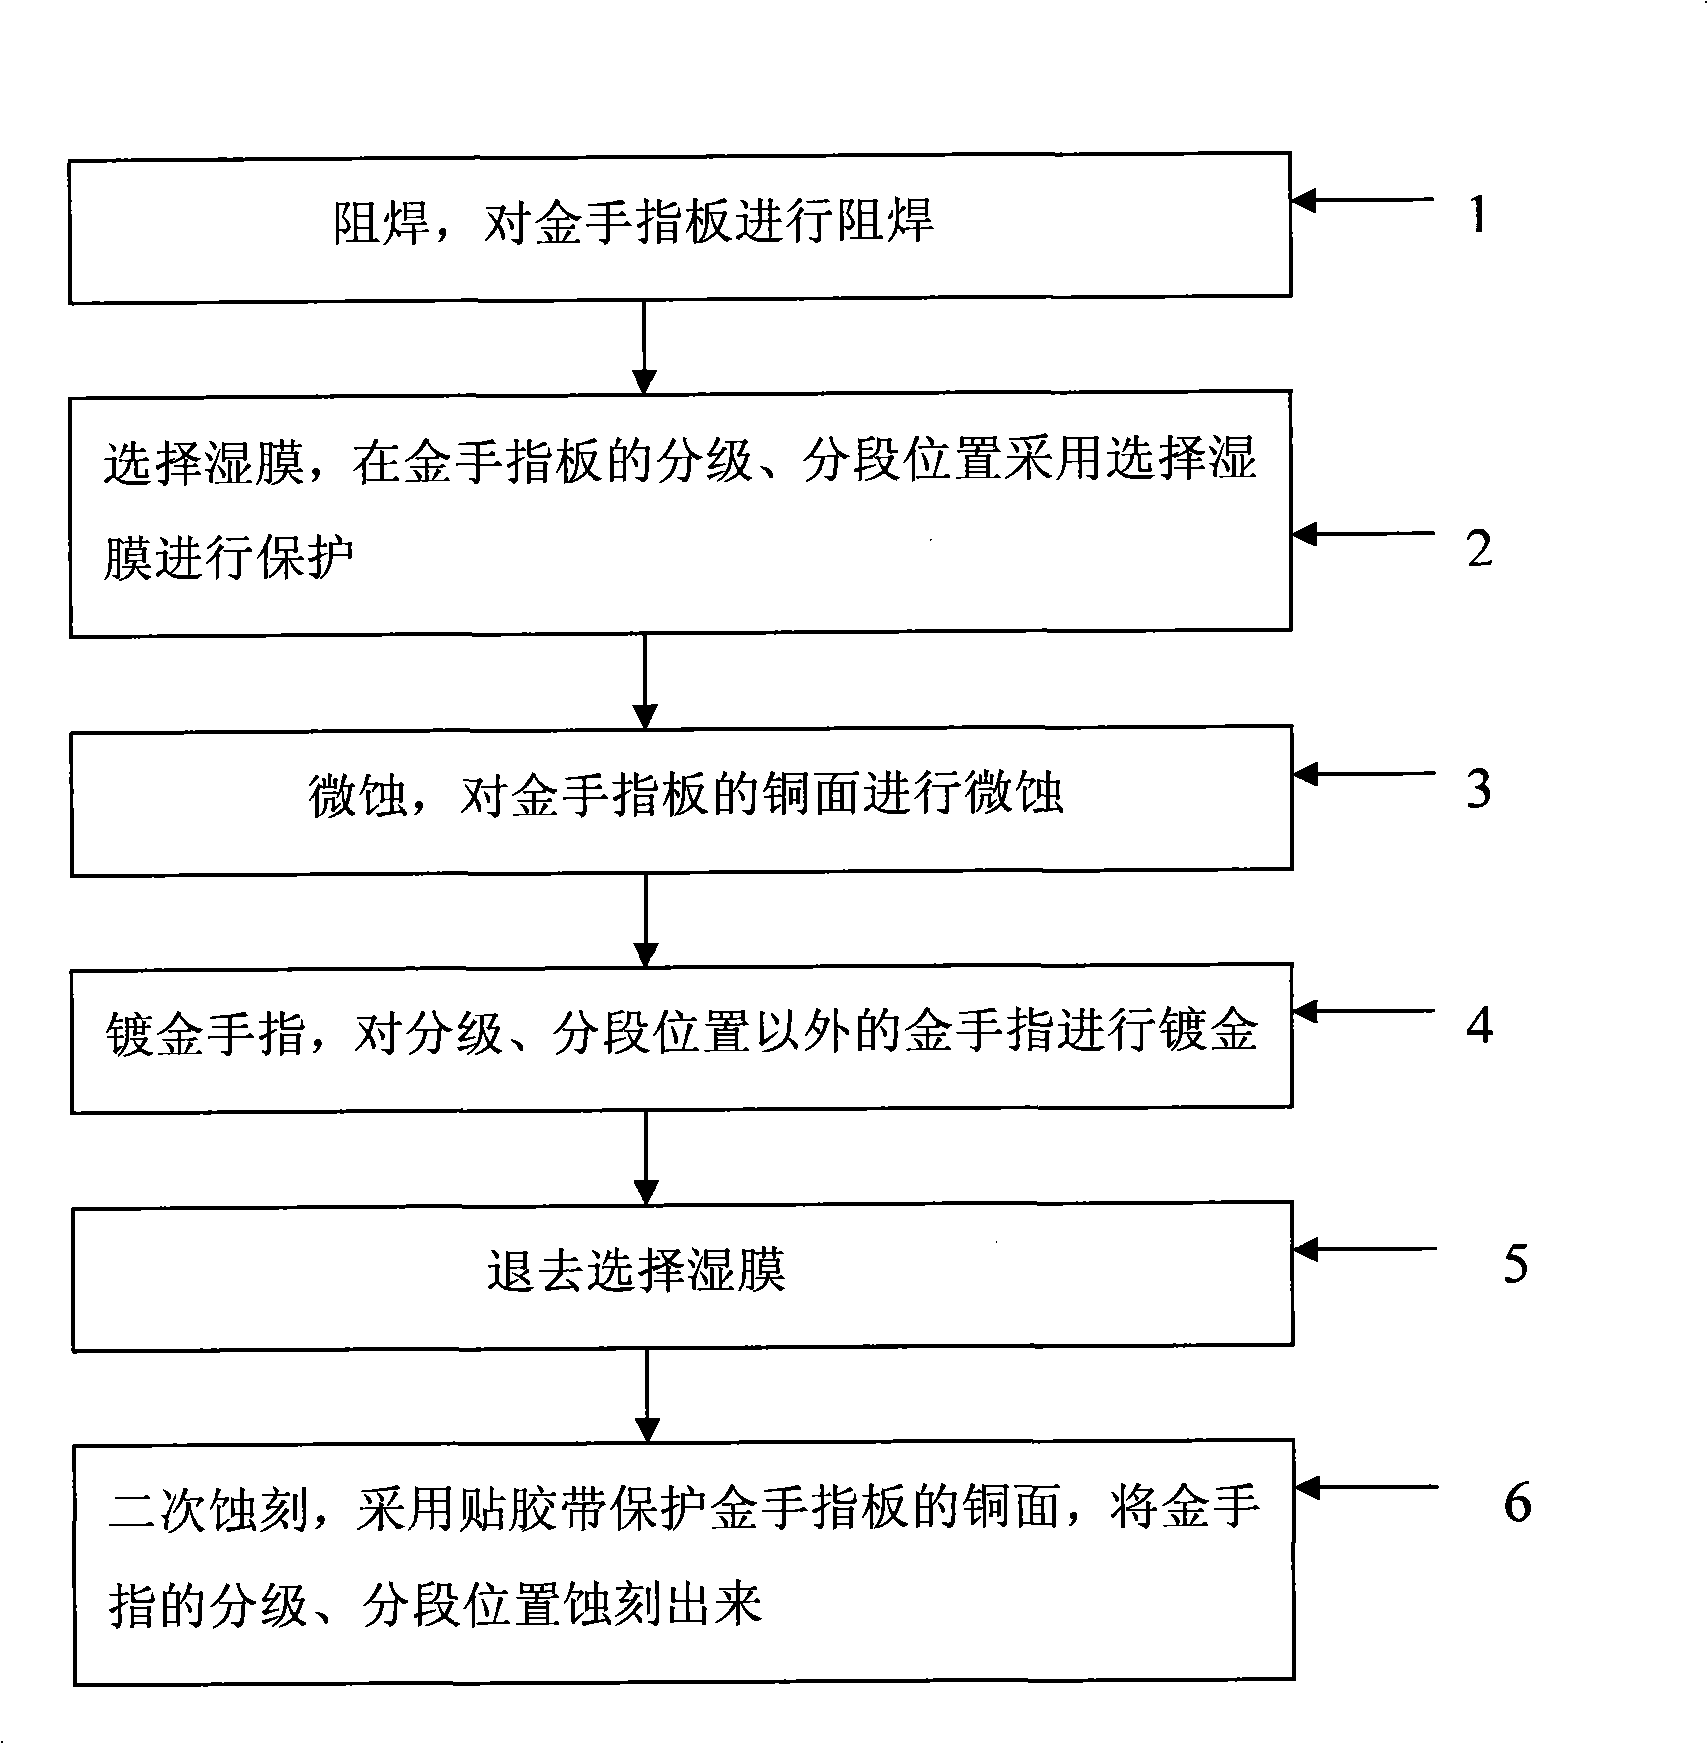 Method for preparing hierarchical and grading gold finger plate using method of selecting wet film